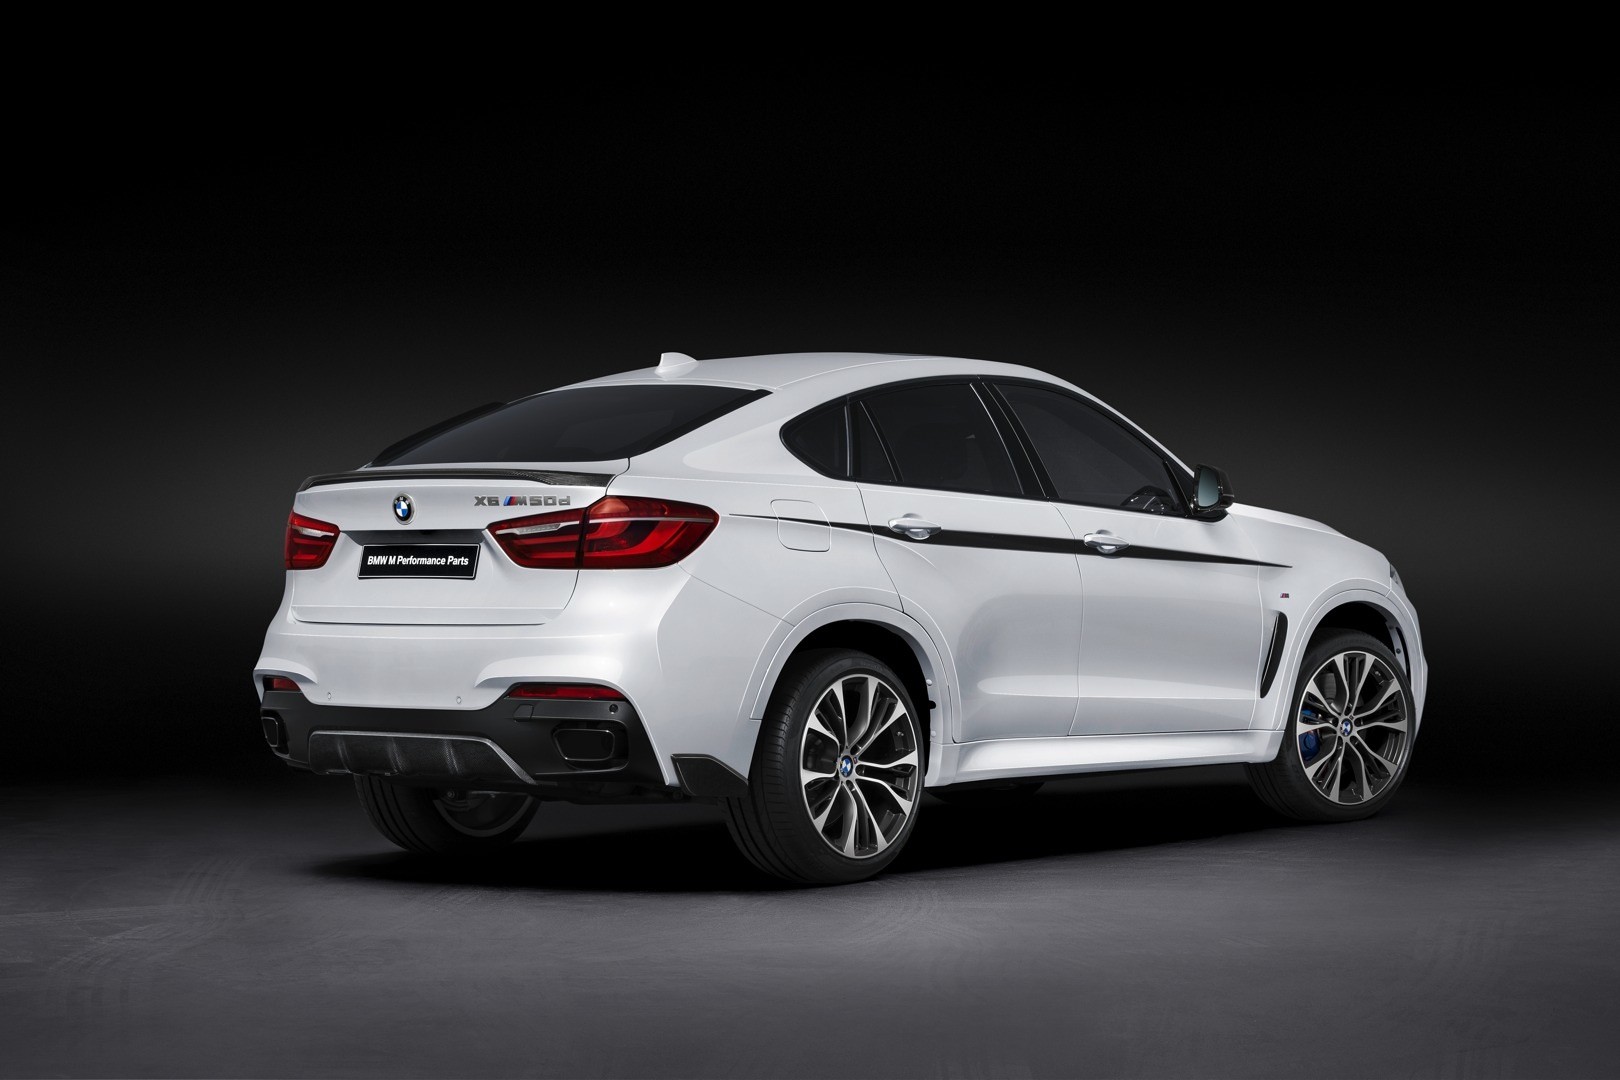 New BMW M Performance Parts for the BMW X6 (F16) - BMW X5 and X6 Forum (F15/ F16)